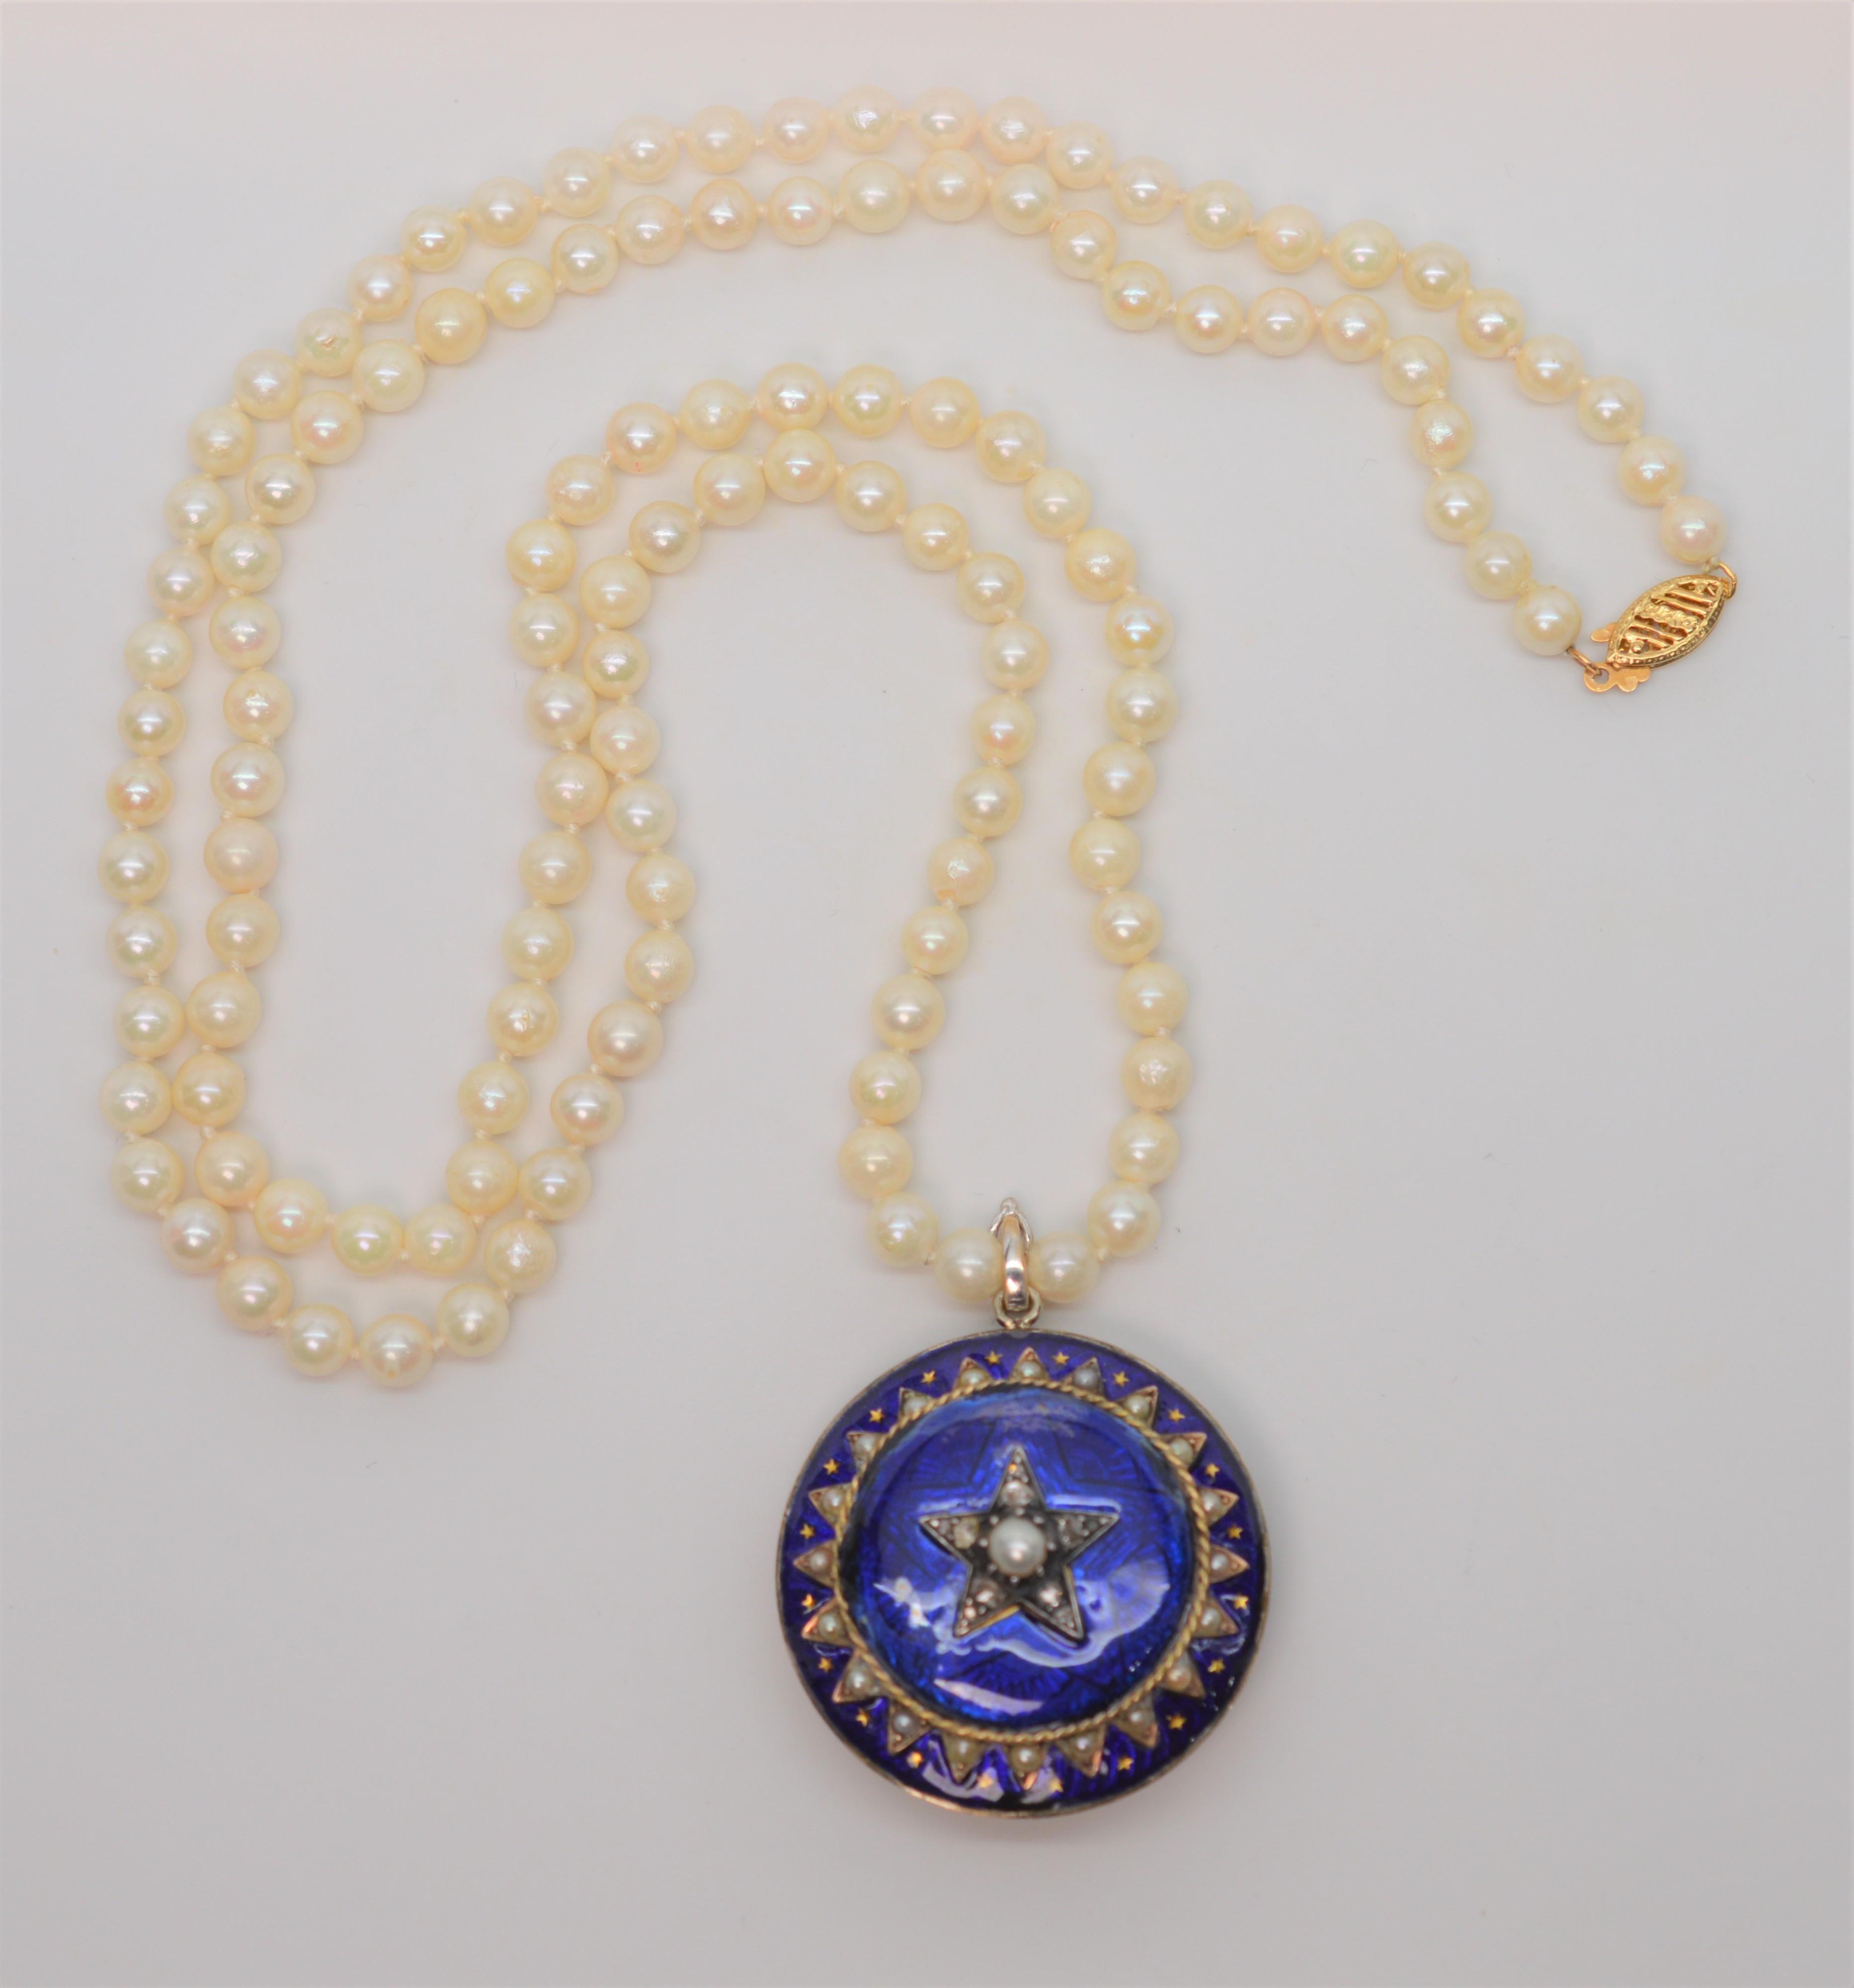 Antique style estate piece of 10 karat Rose Gold and Cobalt Blue Enamel Pin Pendant with Pearl and Diamond Accents. This celestial brooch sits on a thirty inch strand of natural 5-1/4mm Akoya Pearls with an enhancer clip and finished with a 14 karat